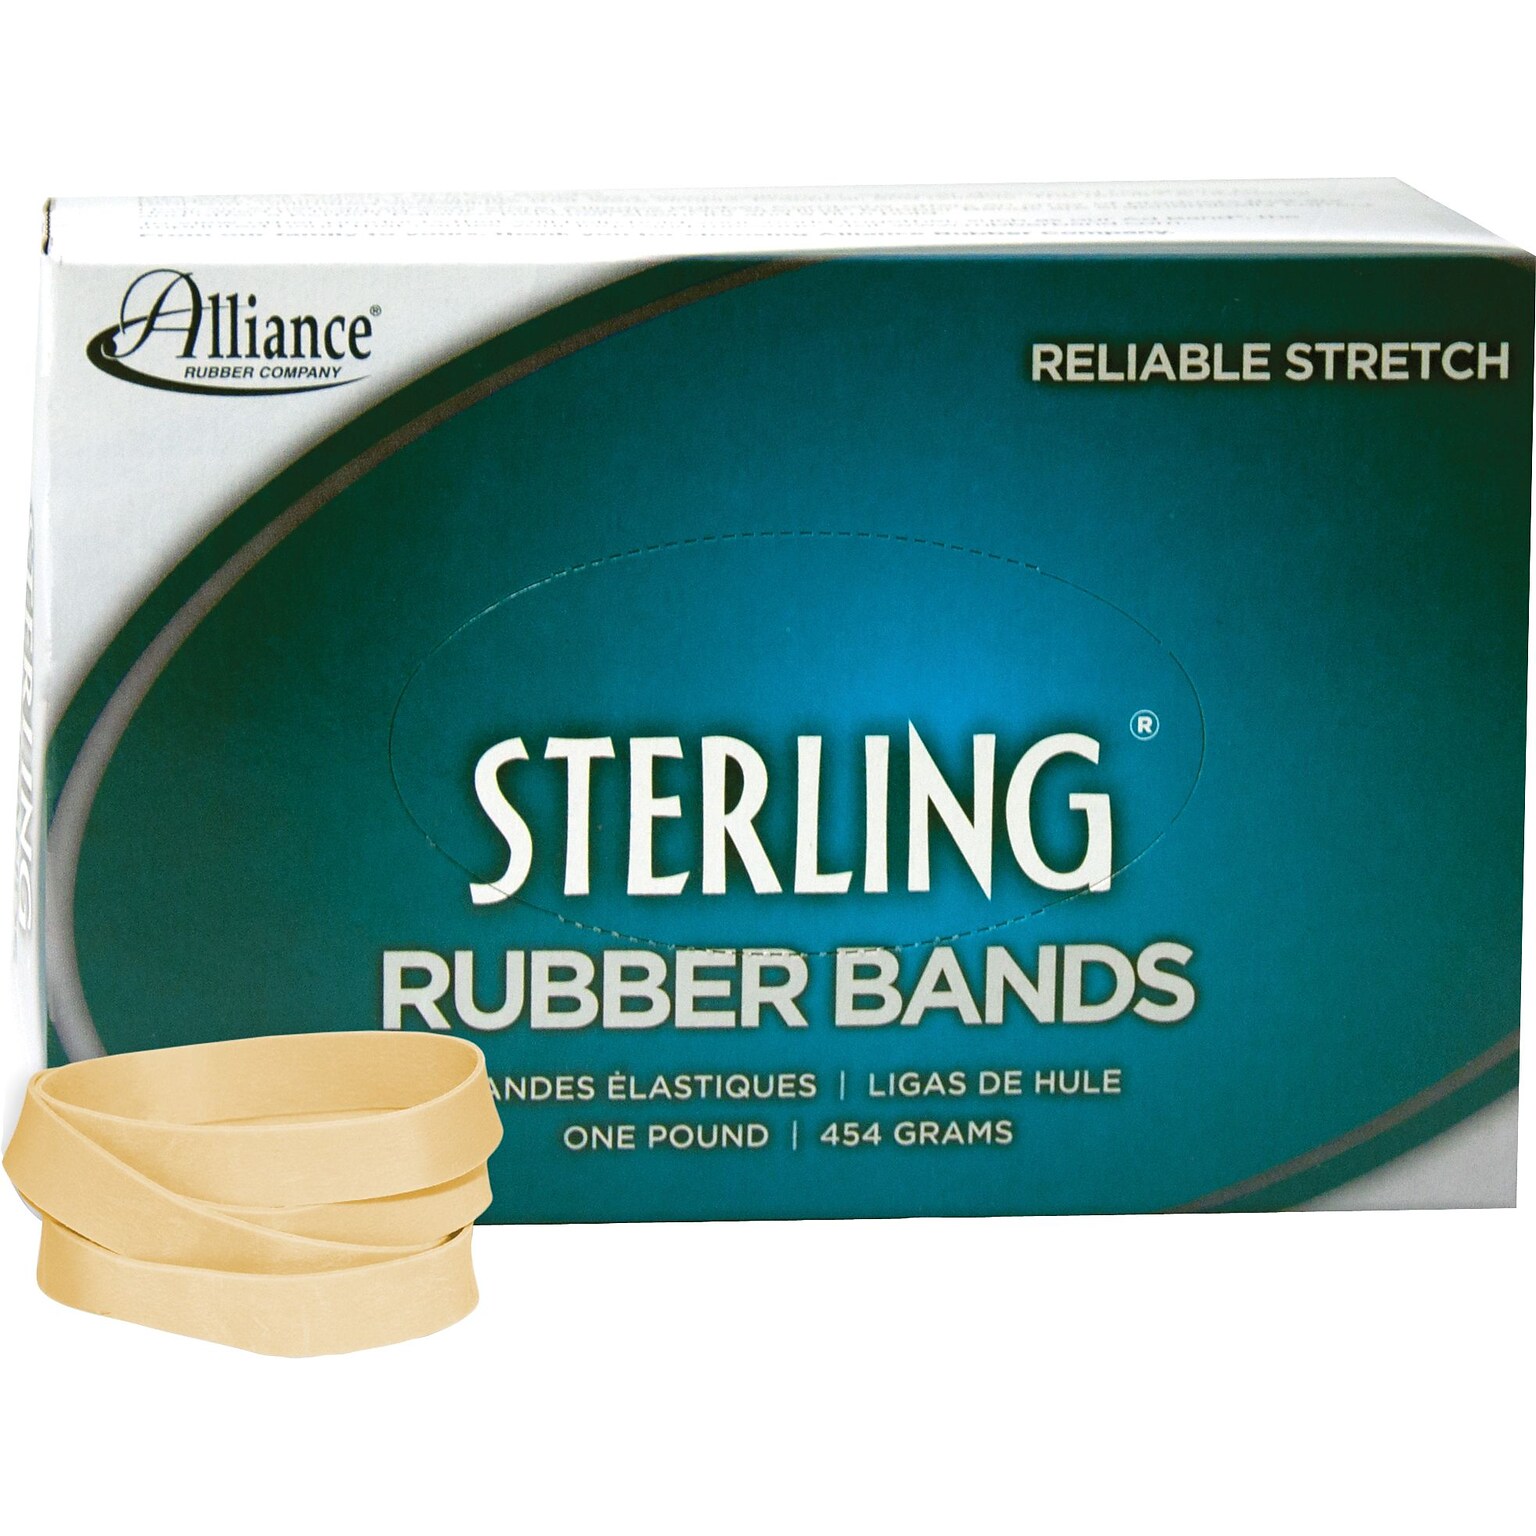 Rubber Band, Sterling , Meets Fed Spec, Soft Stretch, Easy Apply, Excellent Count, USA MADE, #84 (3-1/2x1/2), 1 lb Box